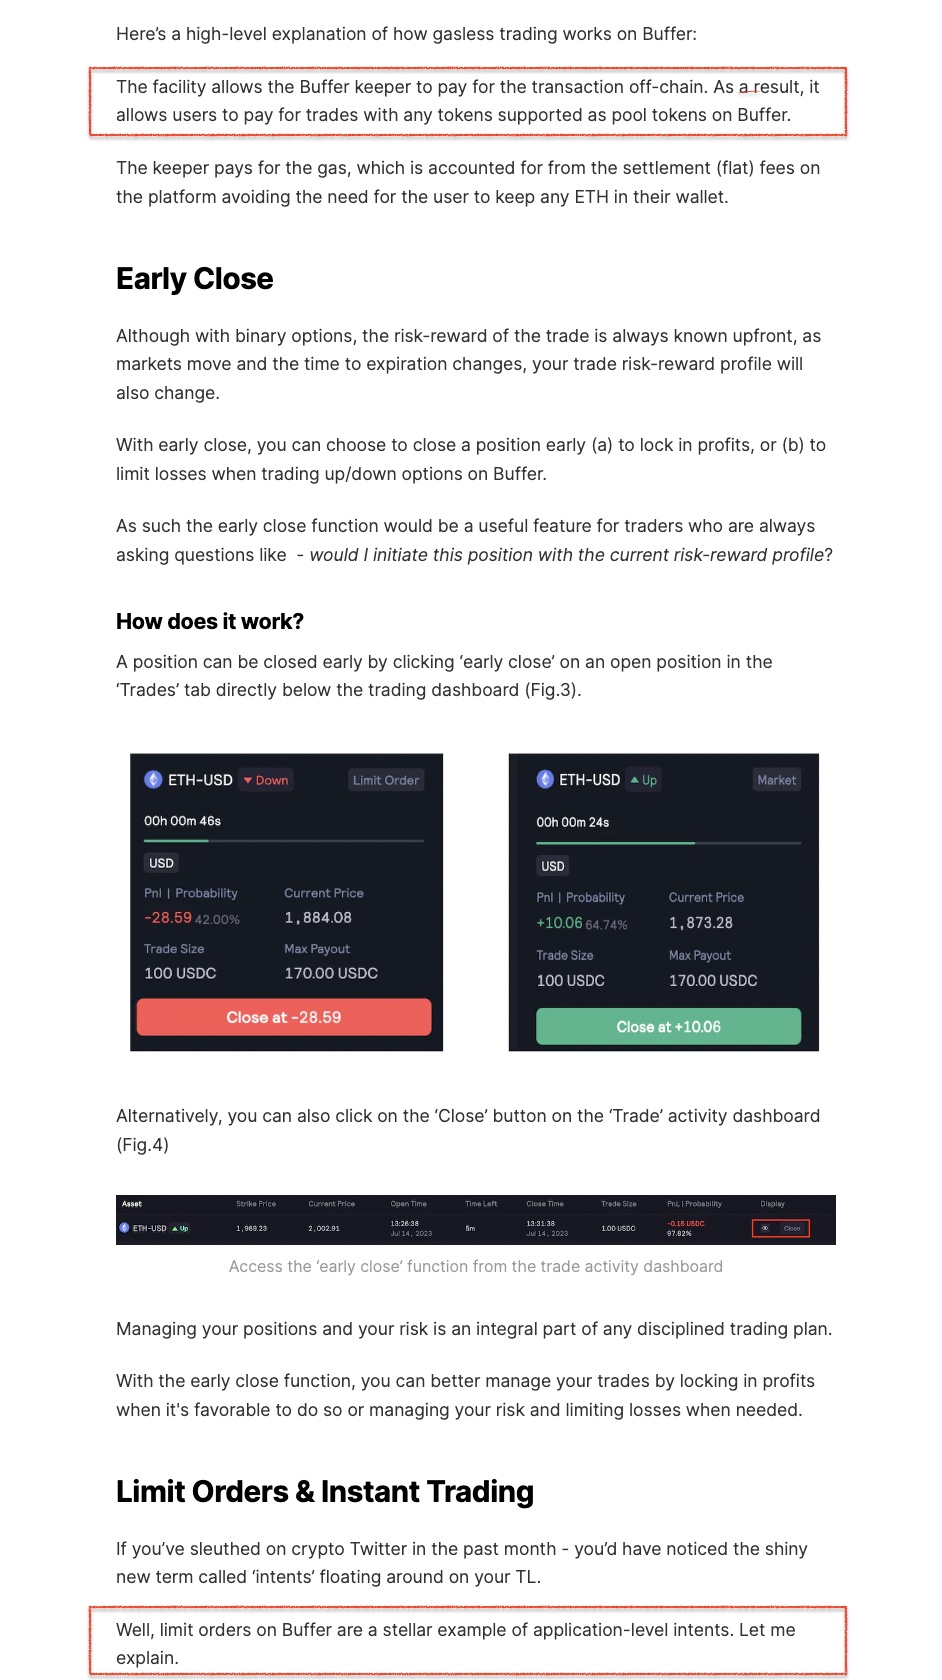 Buffer's Gasless Trading Facility & limit orders (made possible via application-level intents} share resemblance to the features proposed in the UniswapX Whitepaper